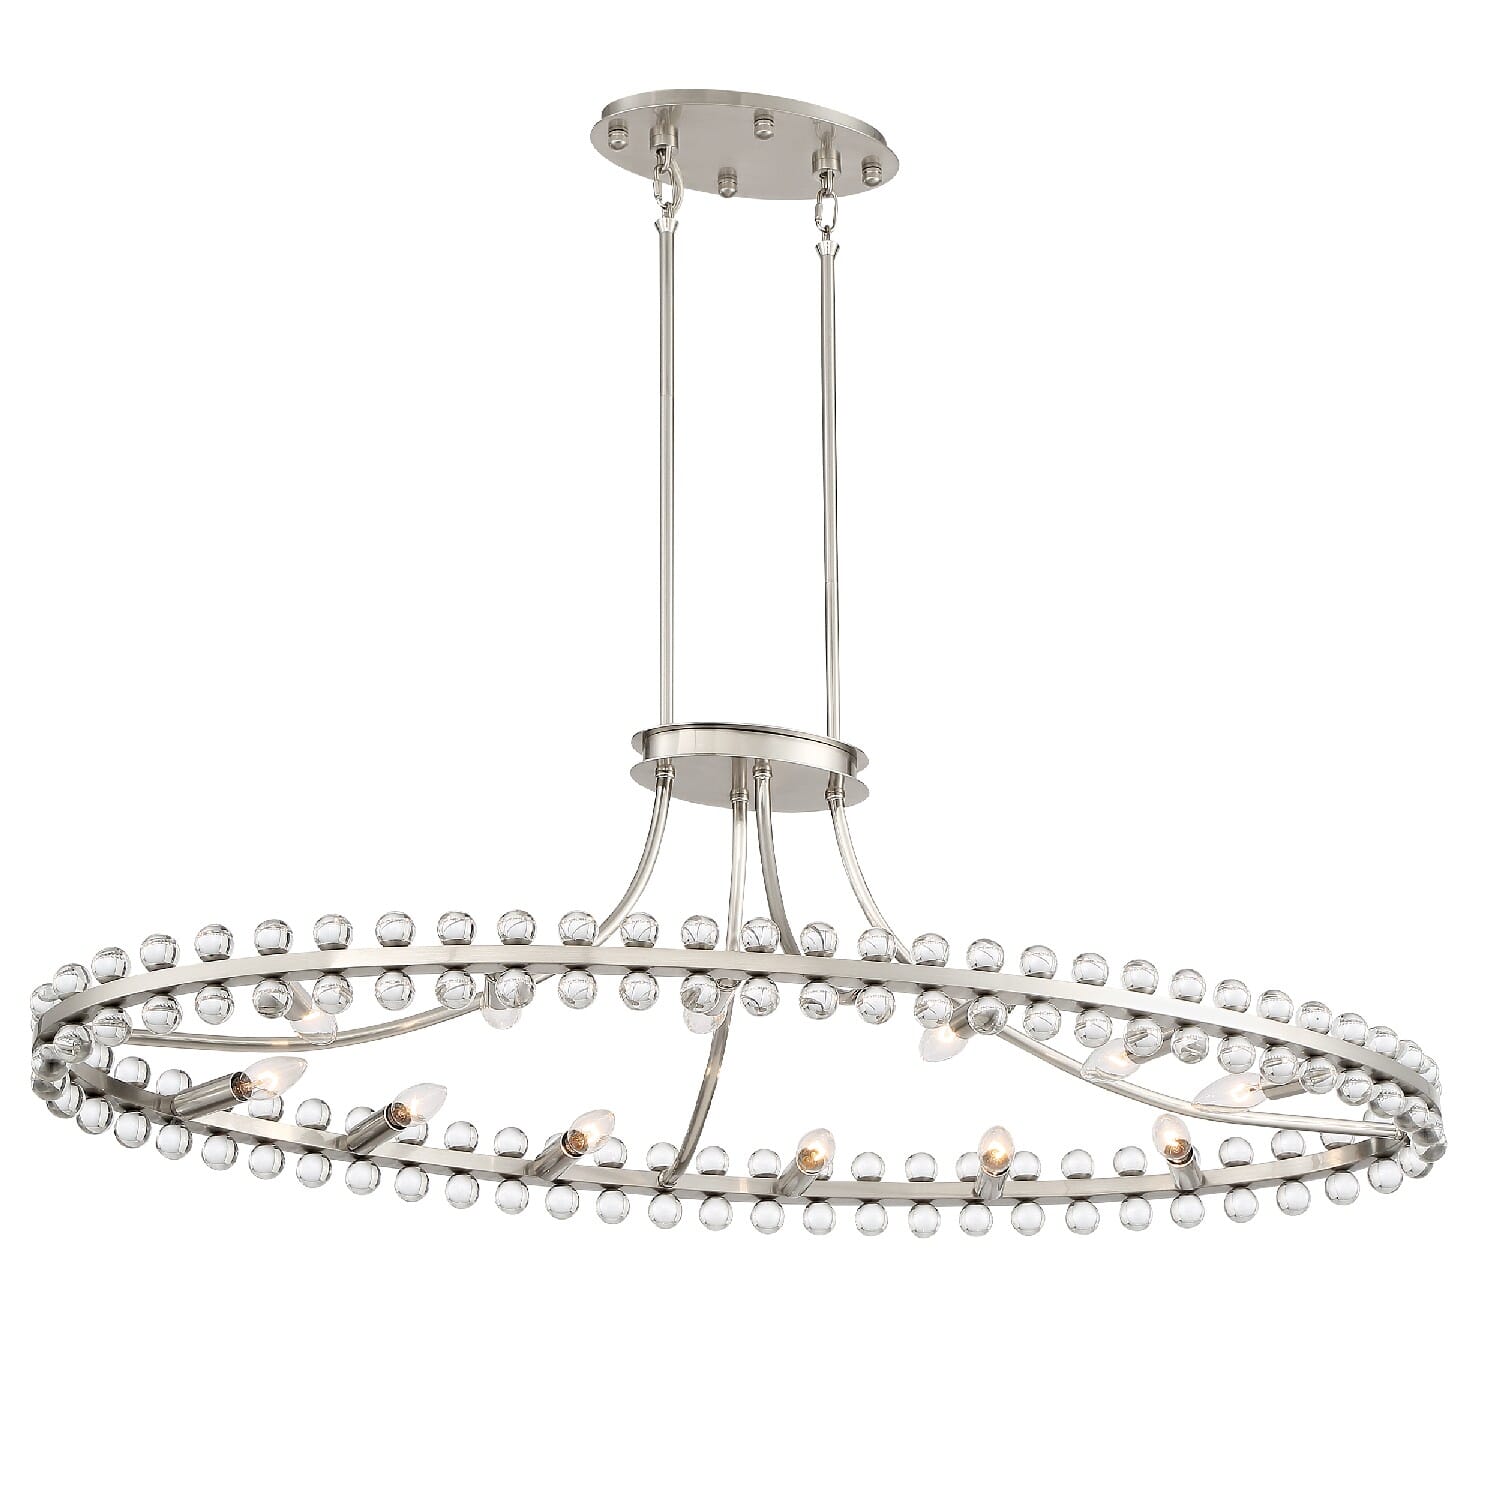 Crystorama Clover 12-Light 12"" Chandelier in Brushed Nickel with Glass Ball Crystals -  CLO-8897-BN